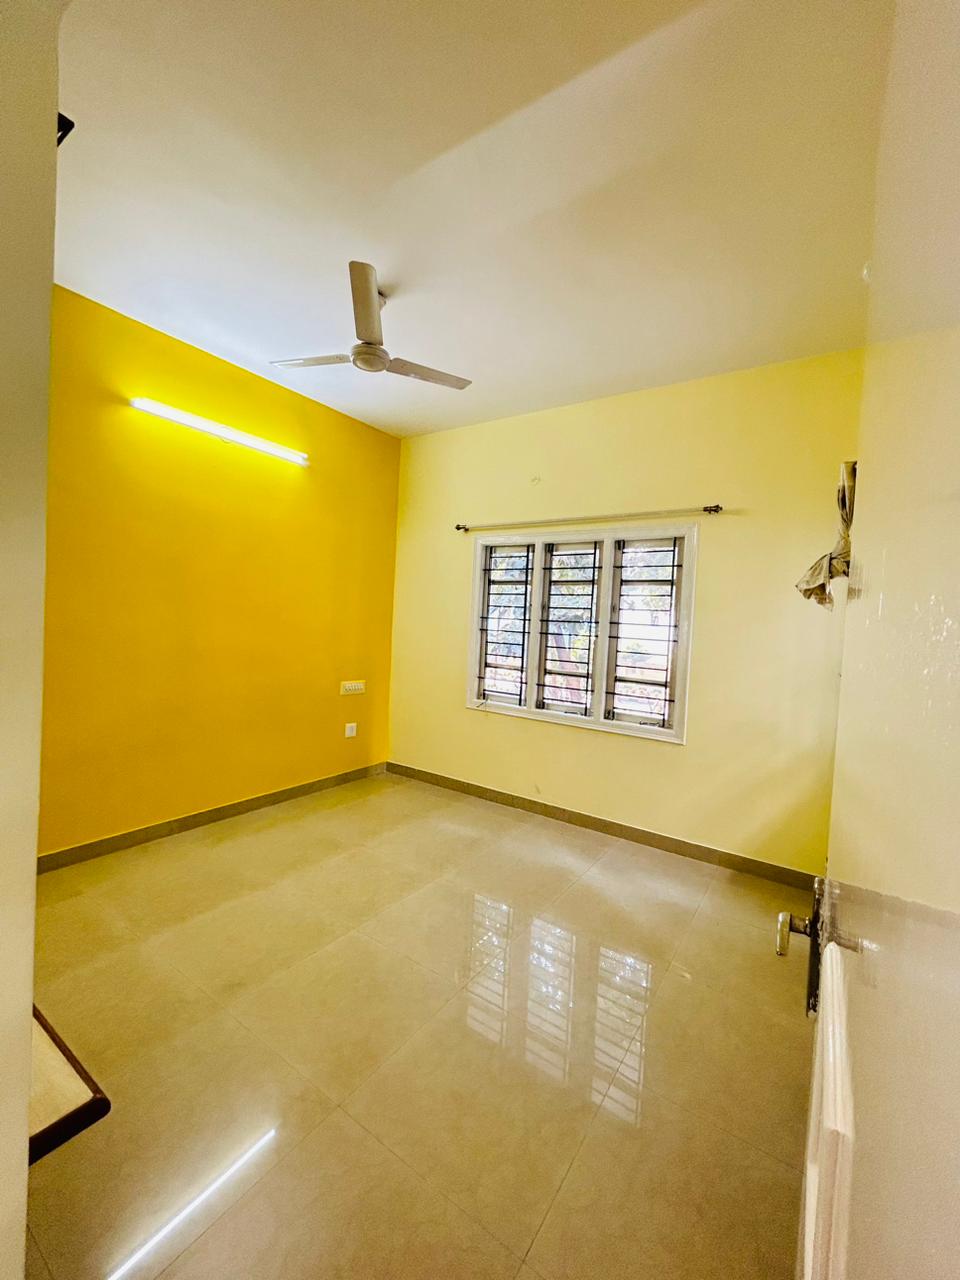 2 BHK Residential Apartment for Lease Only at JAML2 - 2651 in Varanasi